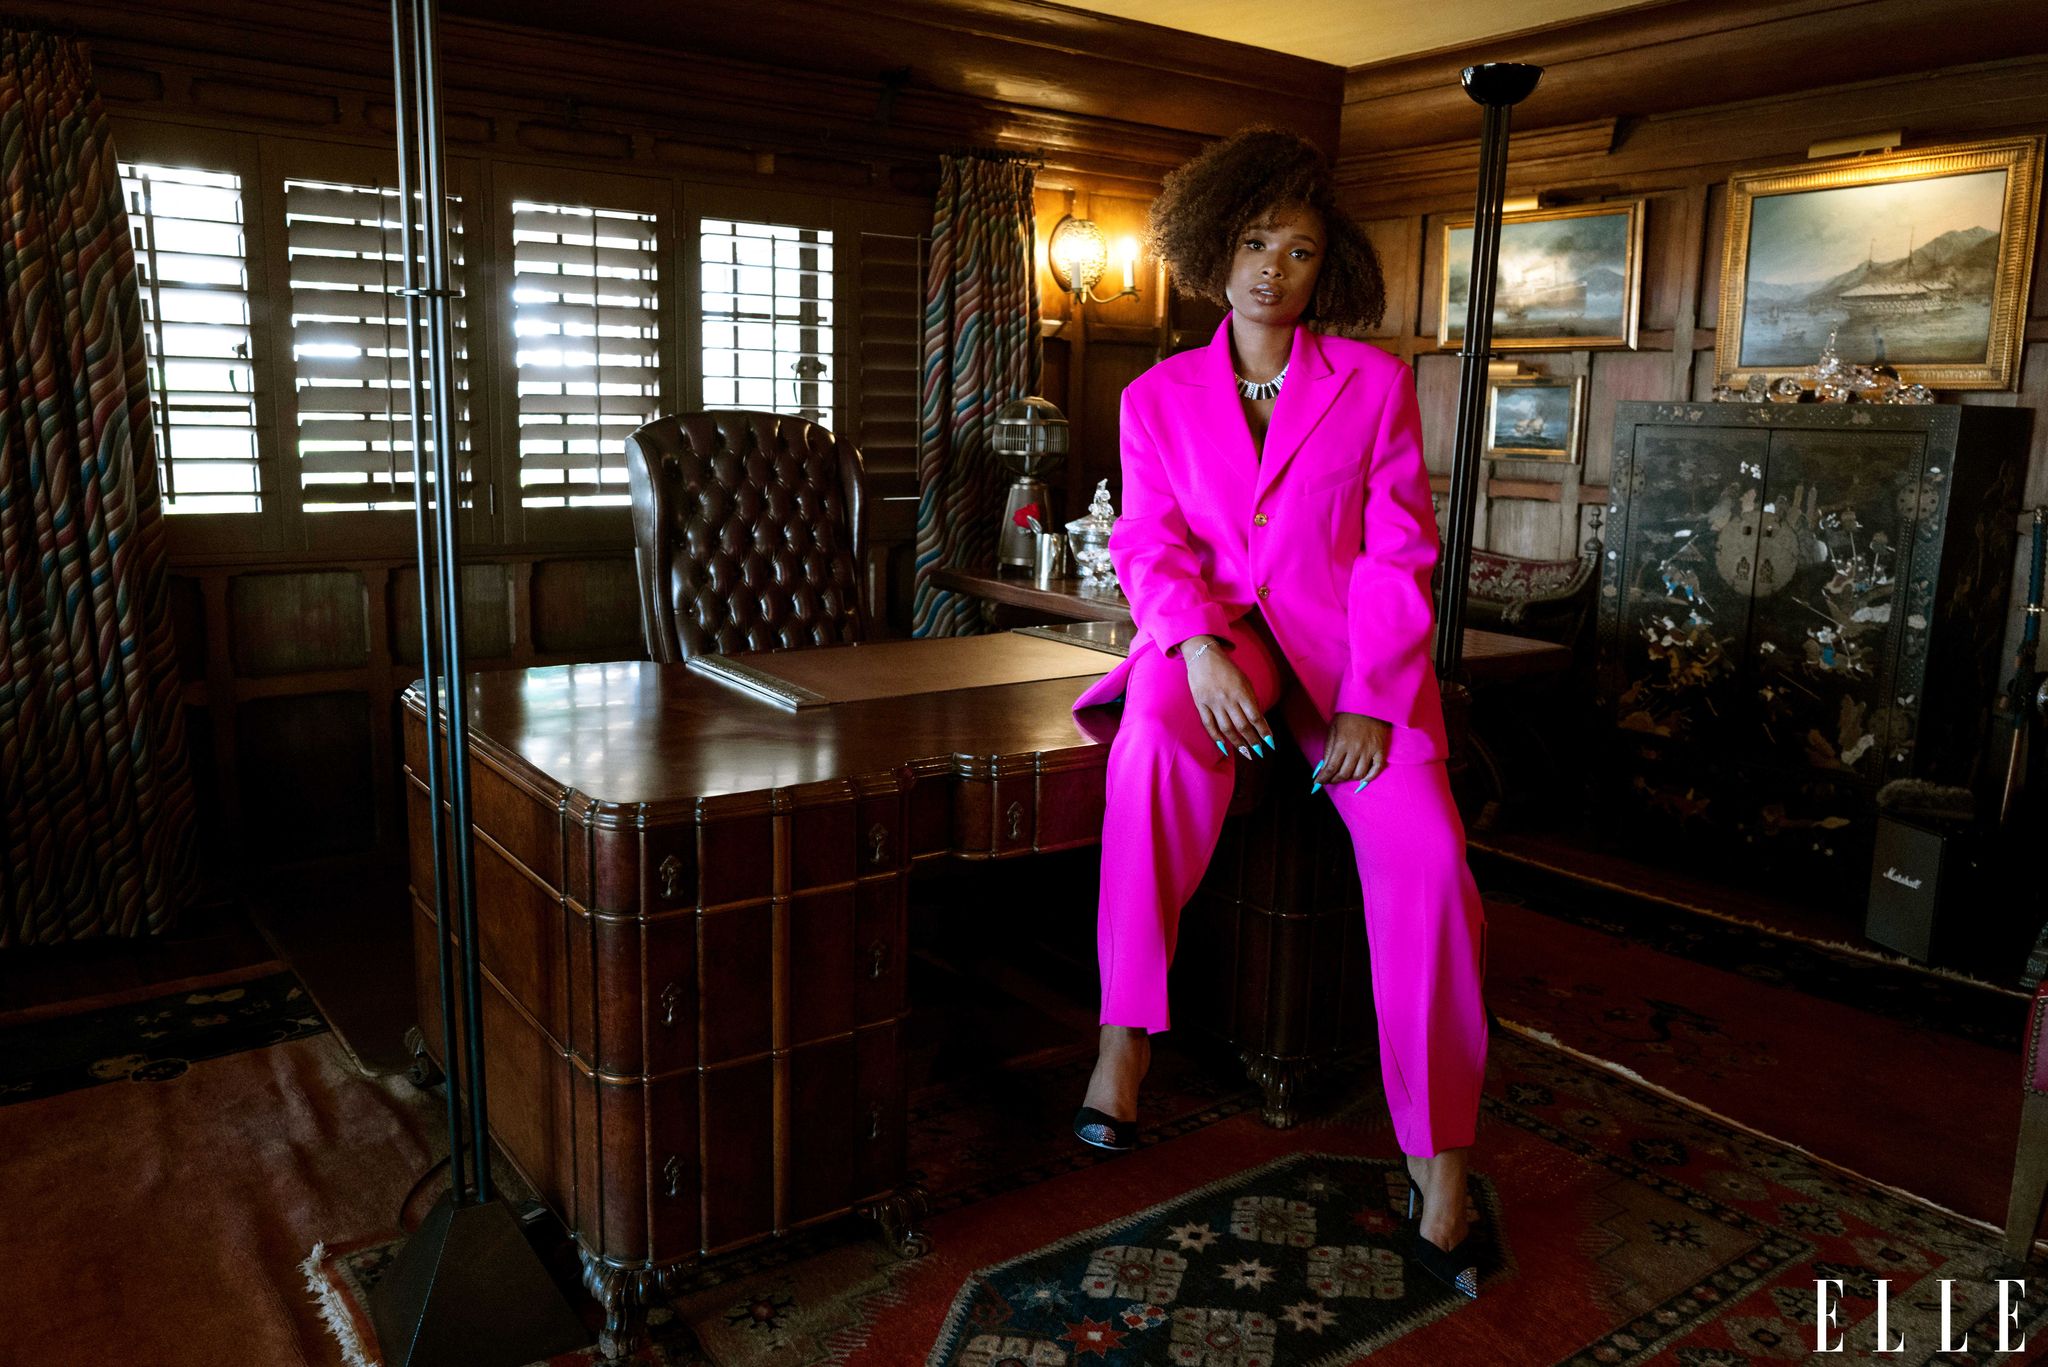 jennifer hudson wears a hot pink suit, sitting on a desk within an office